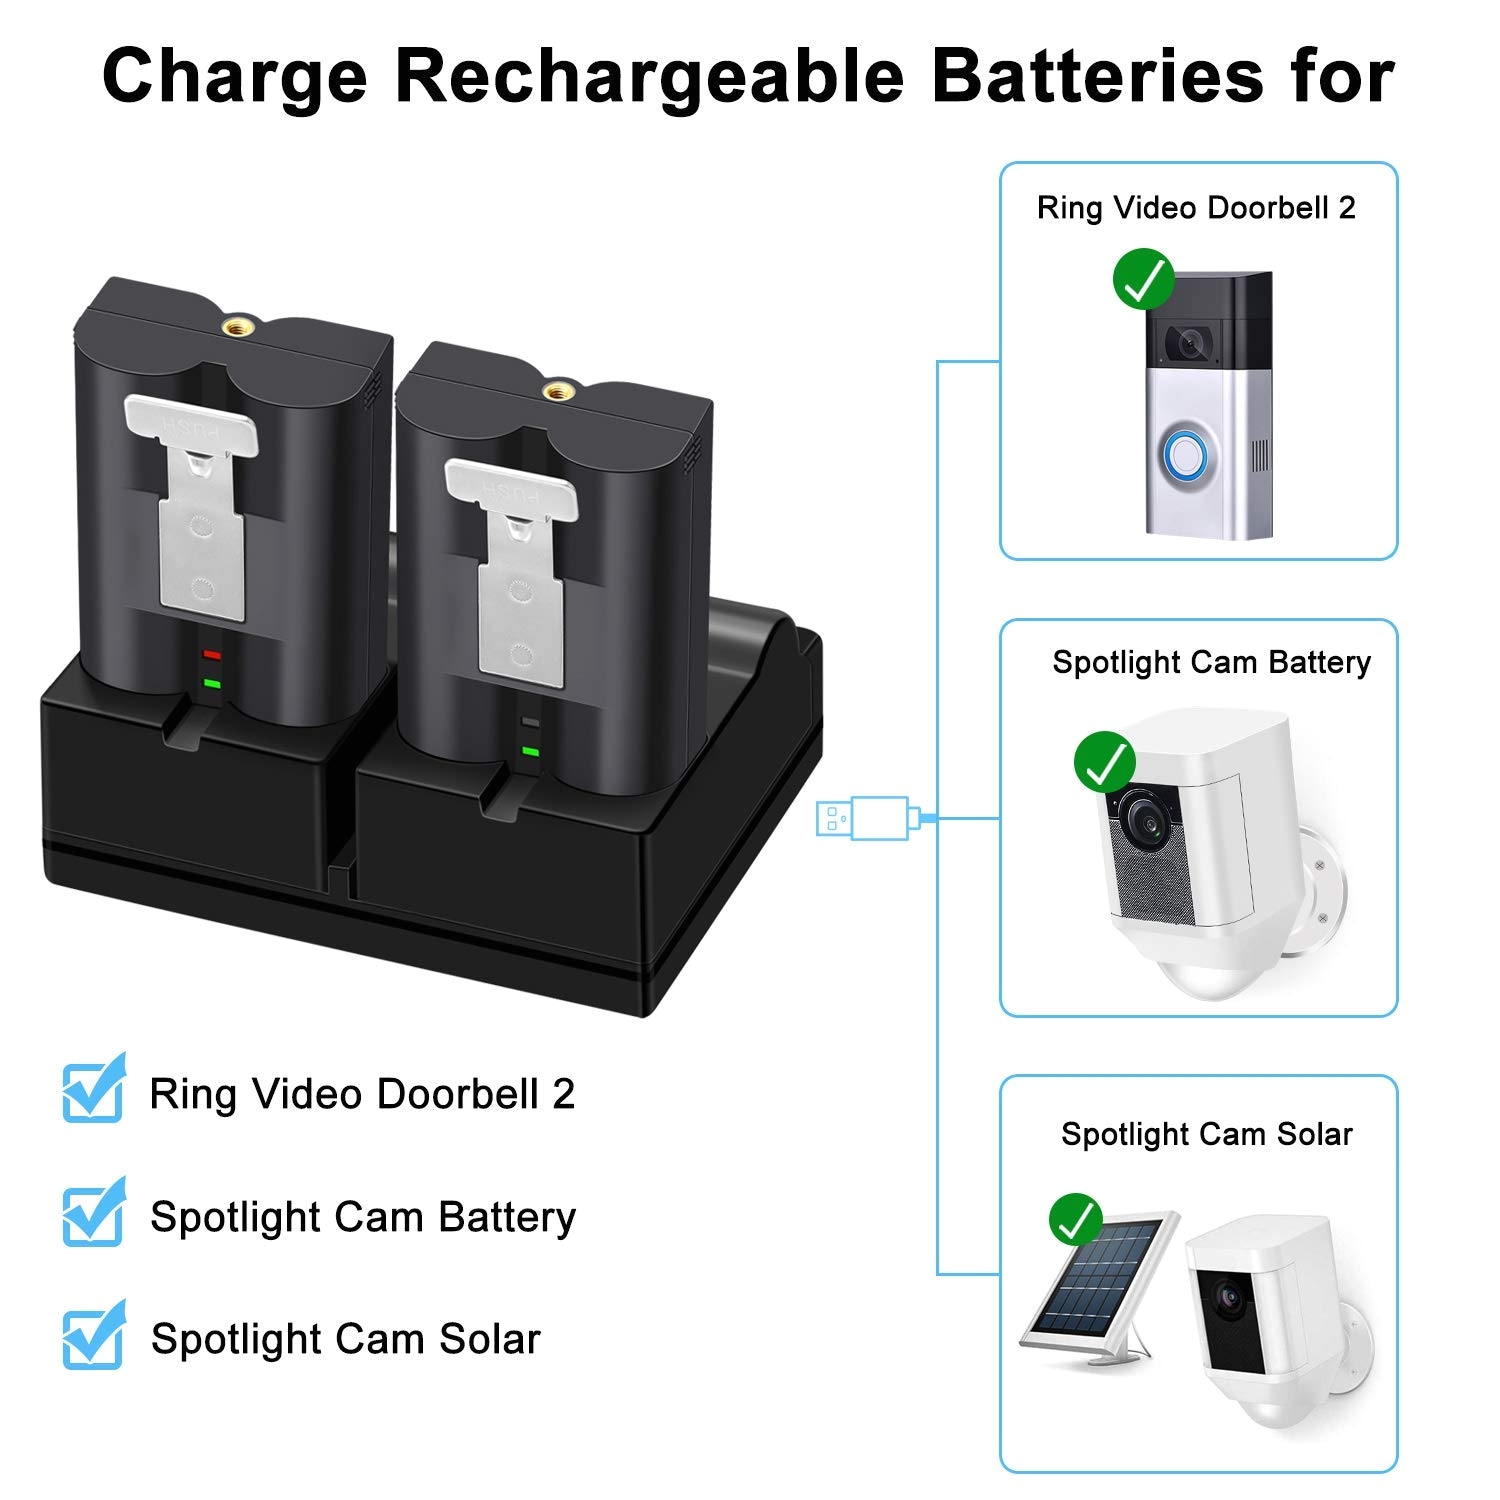 amazon com charging station ring video doorbell 2 ring spotlight cam battery rechargeable batteries charge up to 2 ring batteries at the same time